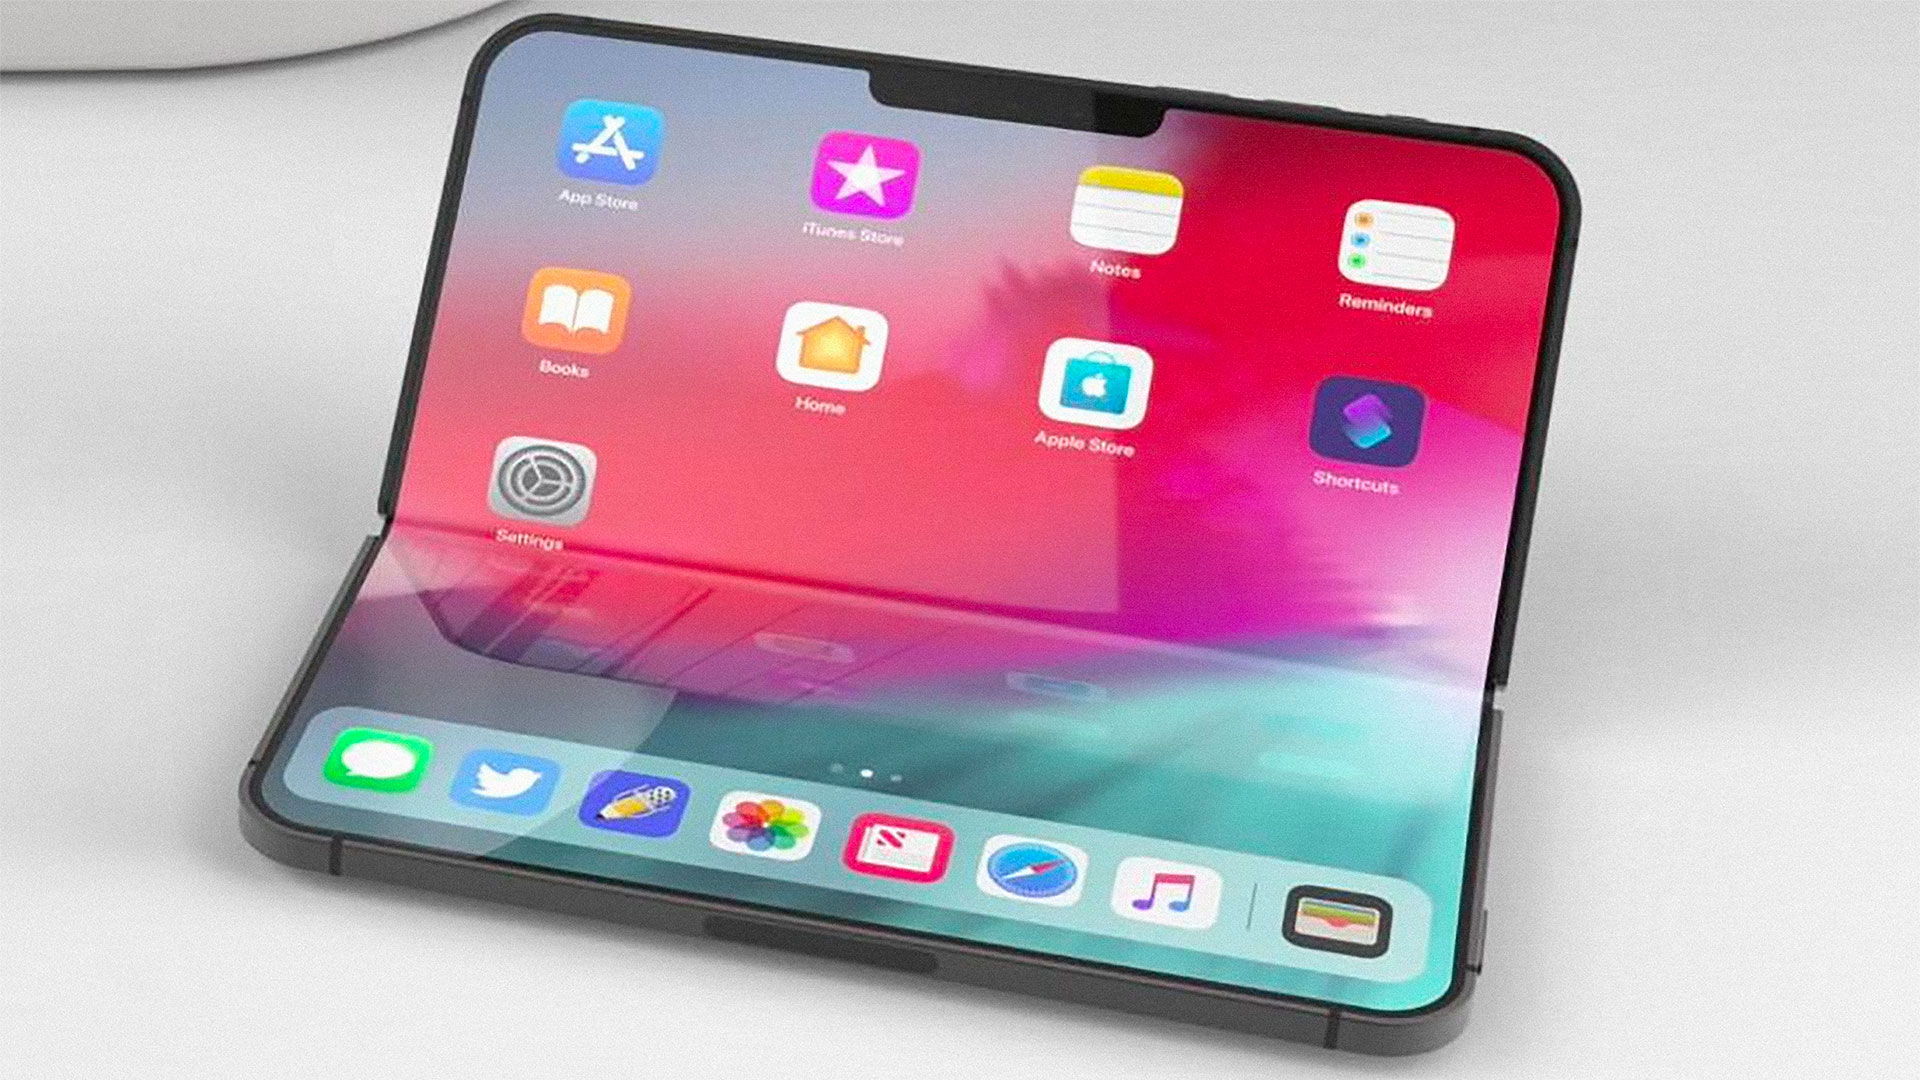 Apple has plans for a foldable iPhone that might actually work